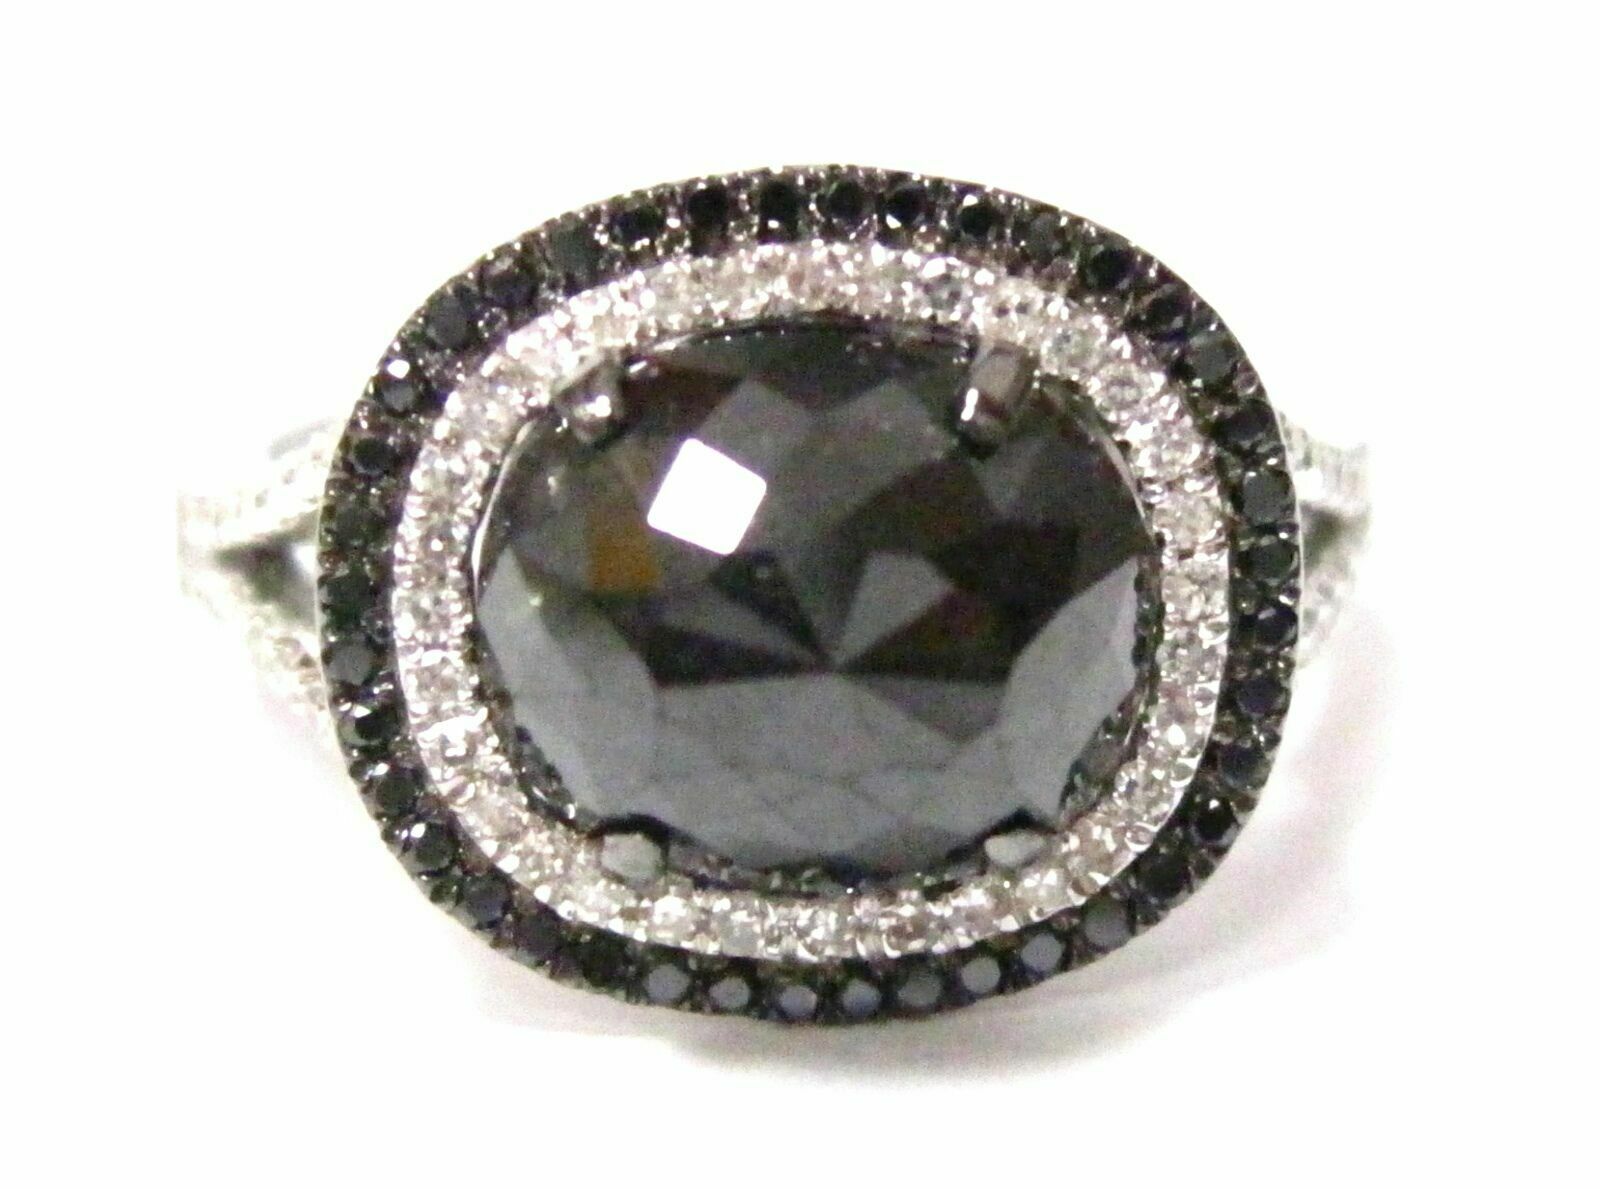 3.58 Tcw Natural Oval Black Diamond Cocktail Ring Size 6.5 14k White Gold